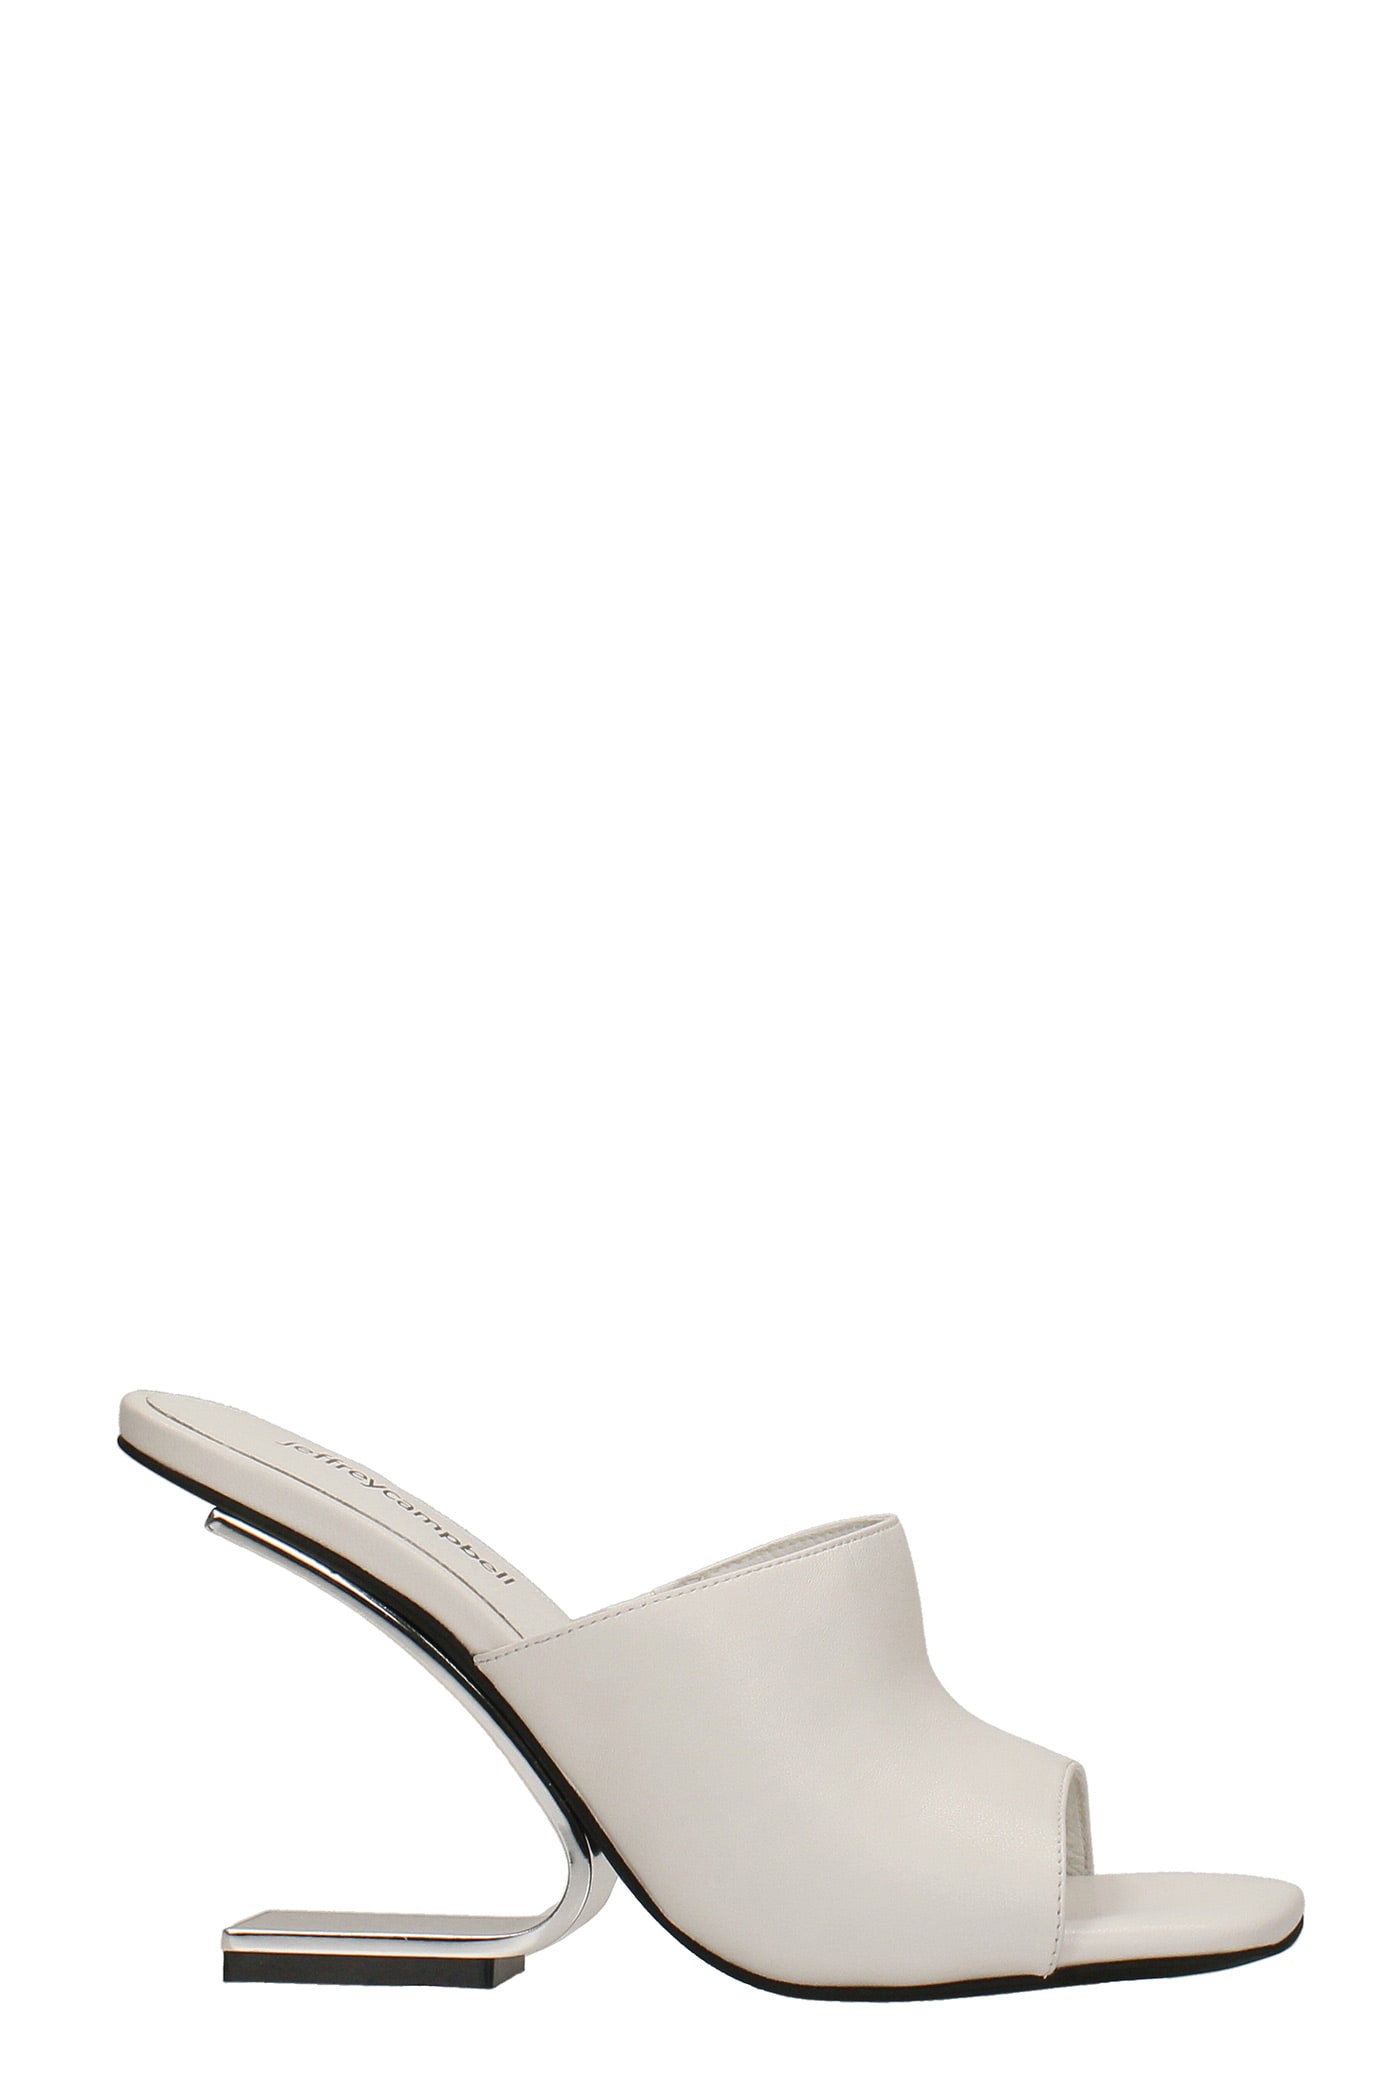 Jeffrey Campbell Protactor Sandals In White Leather